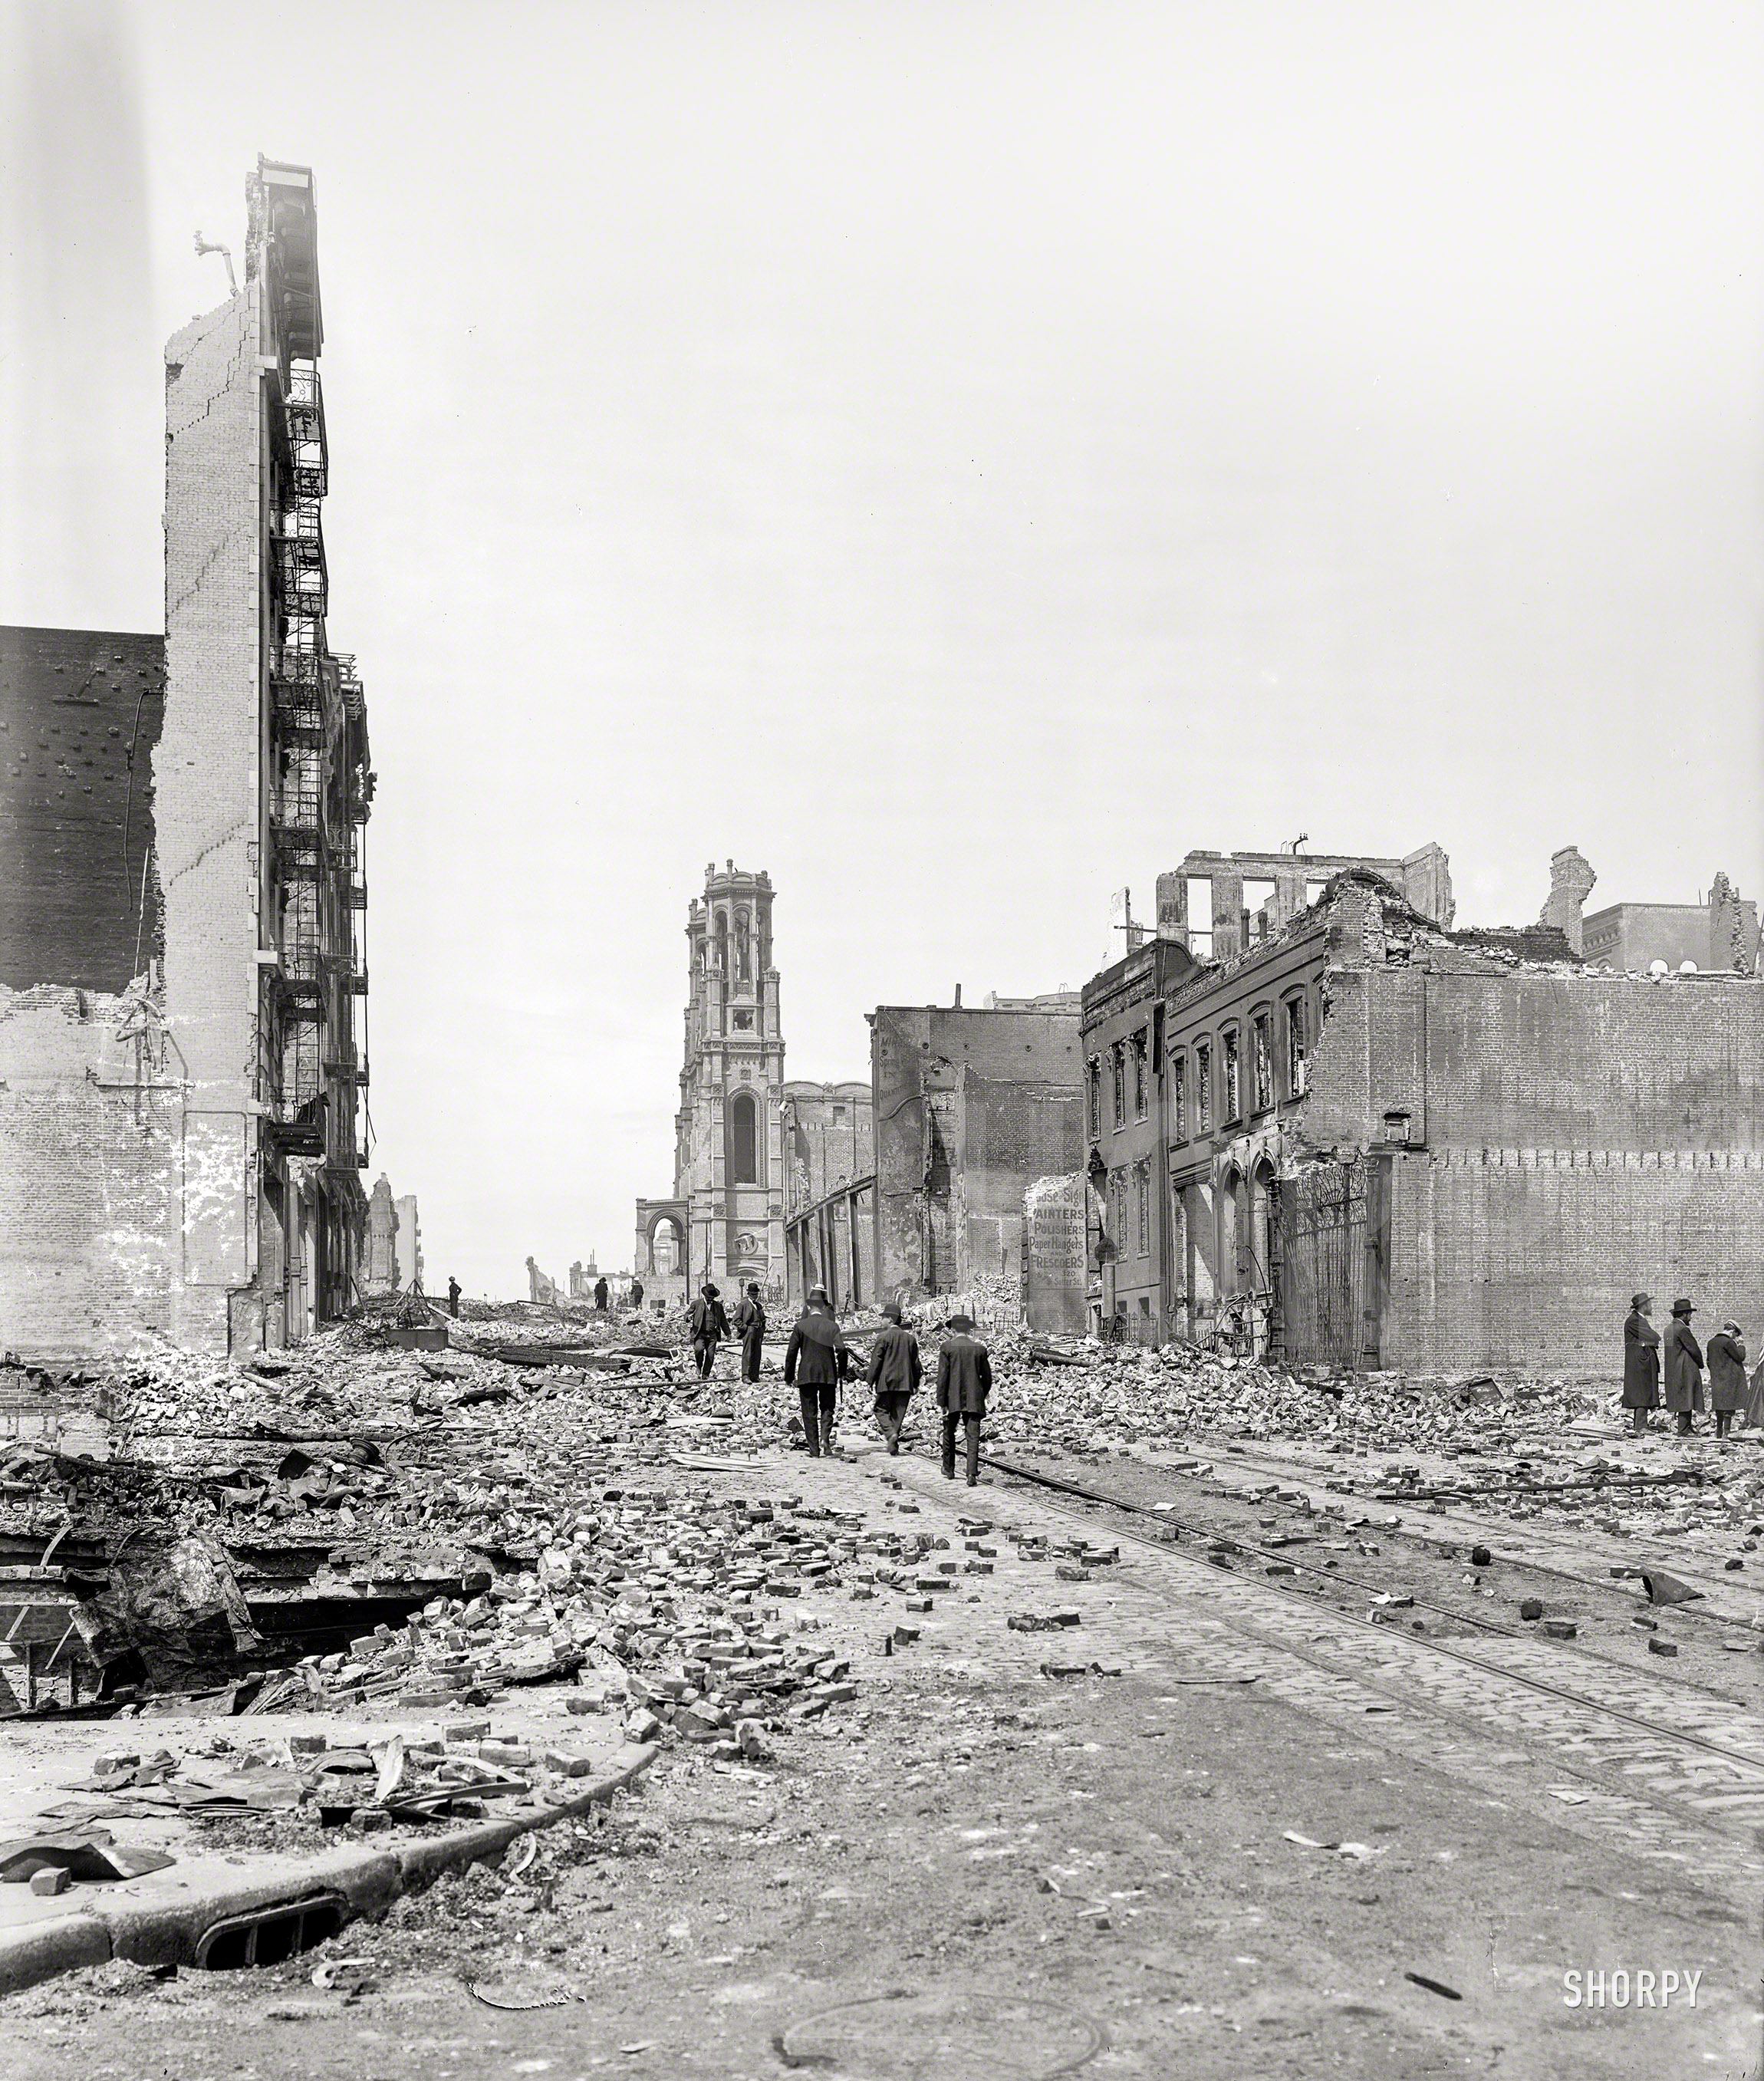 "Up Sutter Street from Grant Avenue." Aftermath of the April 18, 1906, earthquake and fire that reduced much of San Francisco to rubble. At center, the ruins of Sutter Street Synagogue. 8x10 inch dry plate glass negative. View full size.